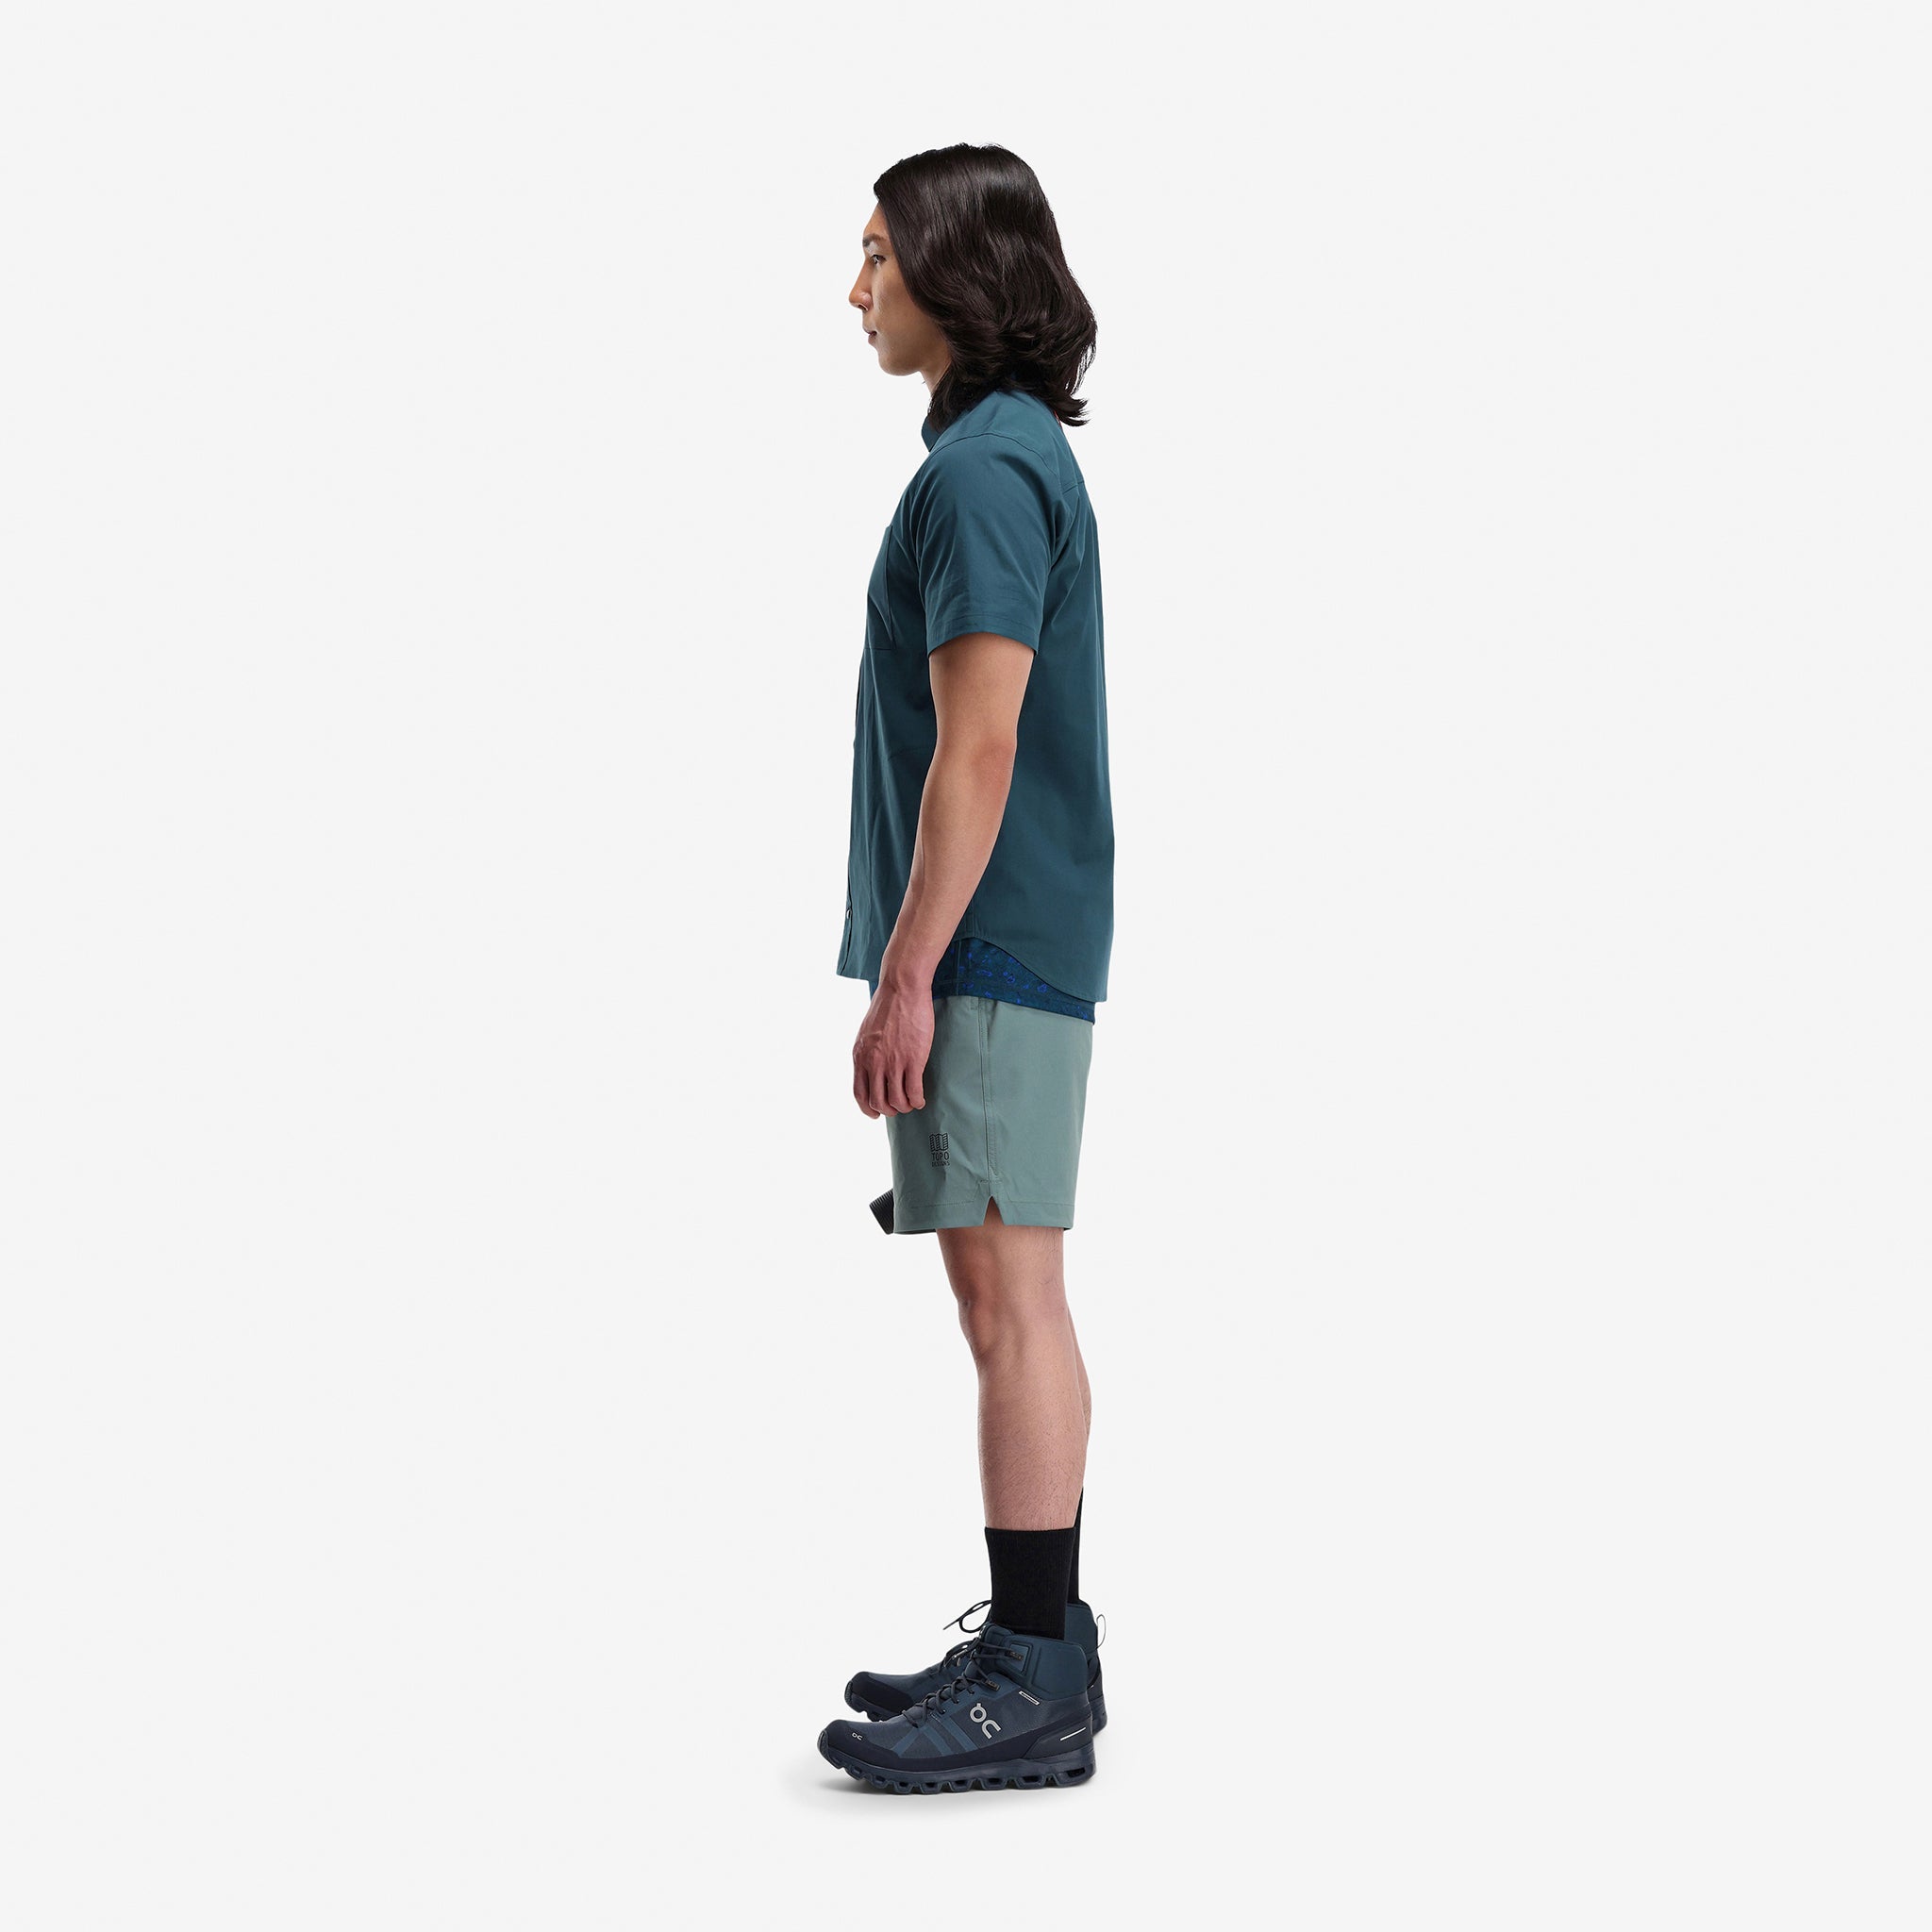 Side model shot of Topo Designs Men's Global lightweight quick dry travel Shorts in "Slate" blue gray. Show on "pond blue" and "brick".